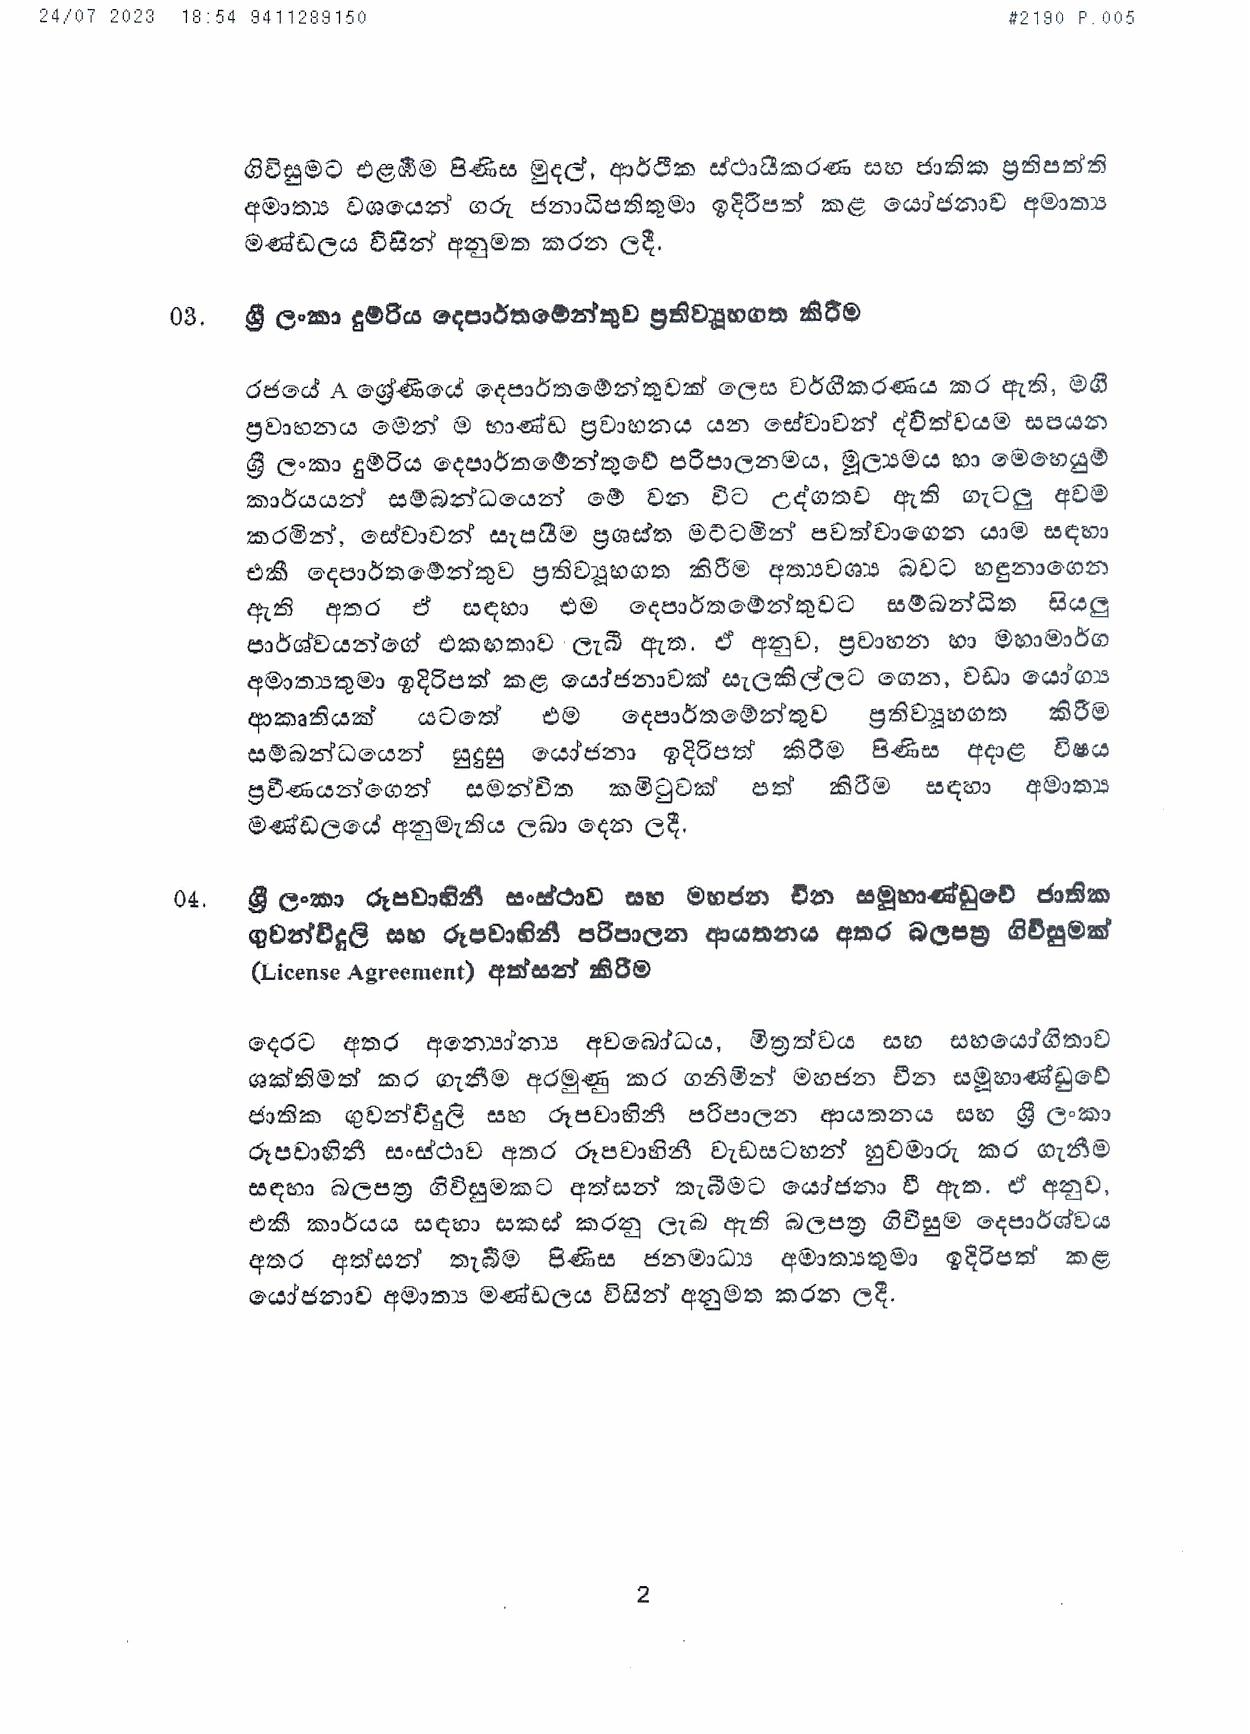 Cabinet Decision on 24.07.2023 page 002